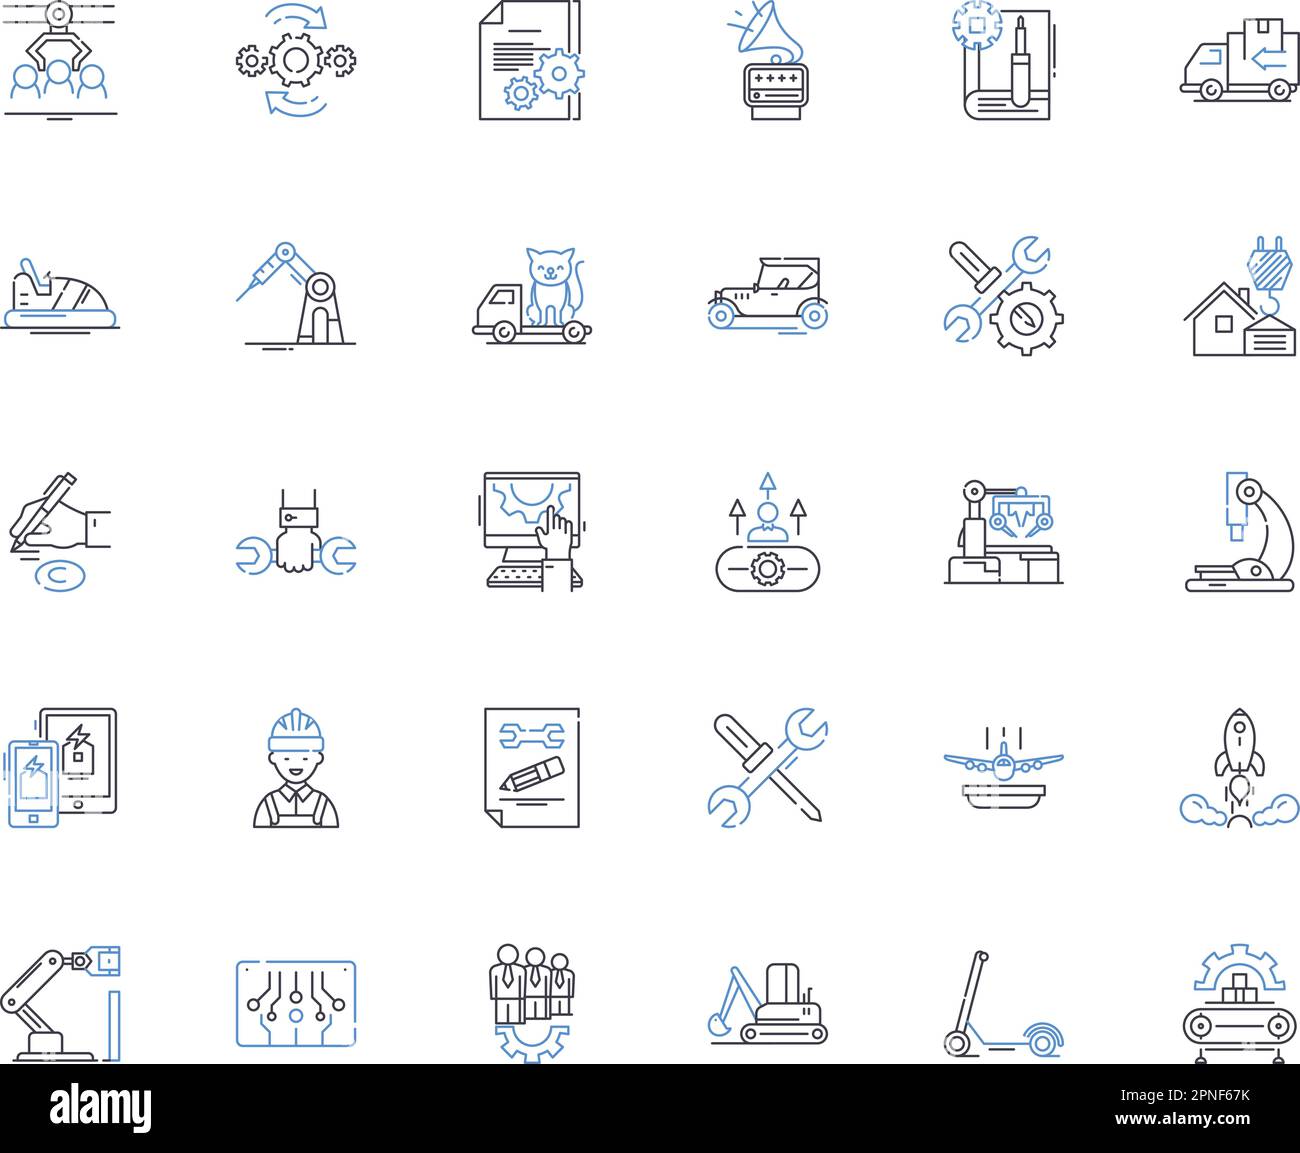 Kinetics line icons collection. Movement, Speed, Dynamics, Reaction, Acceleration, Force, Momentum vector and linear illustration. Flow,Motion,Energy Stock Vector